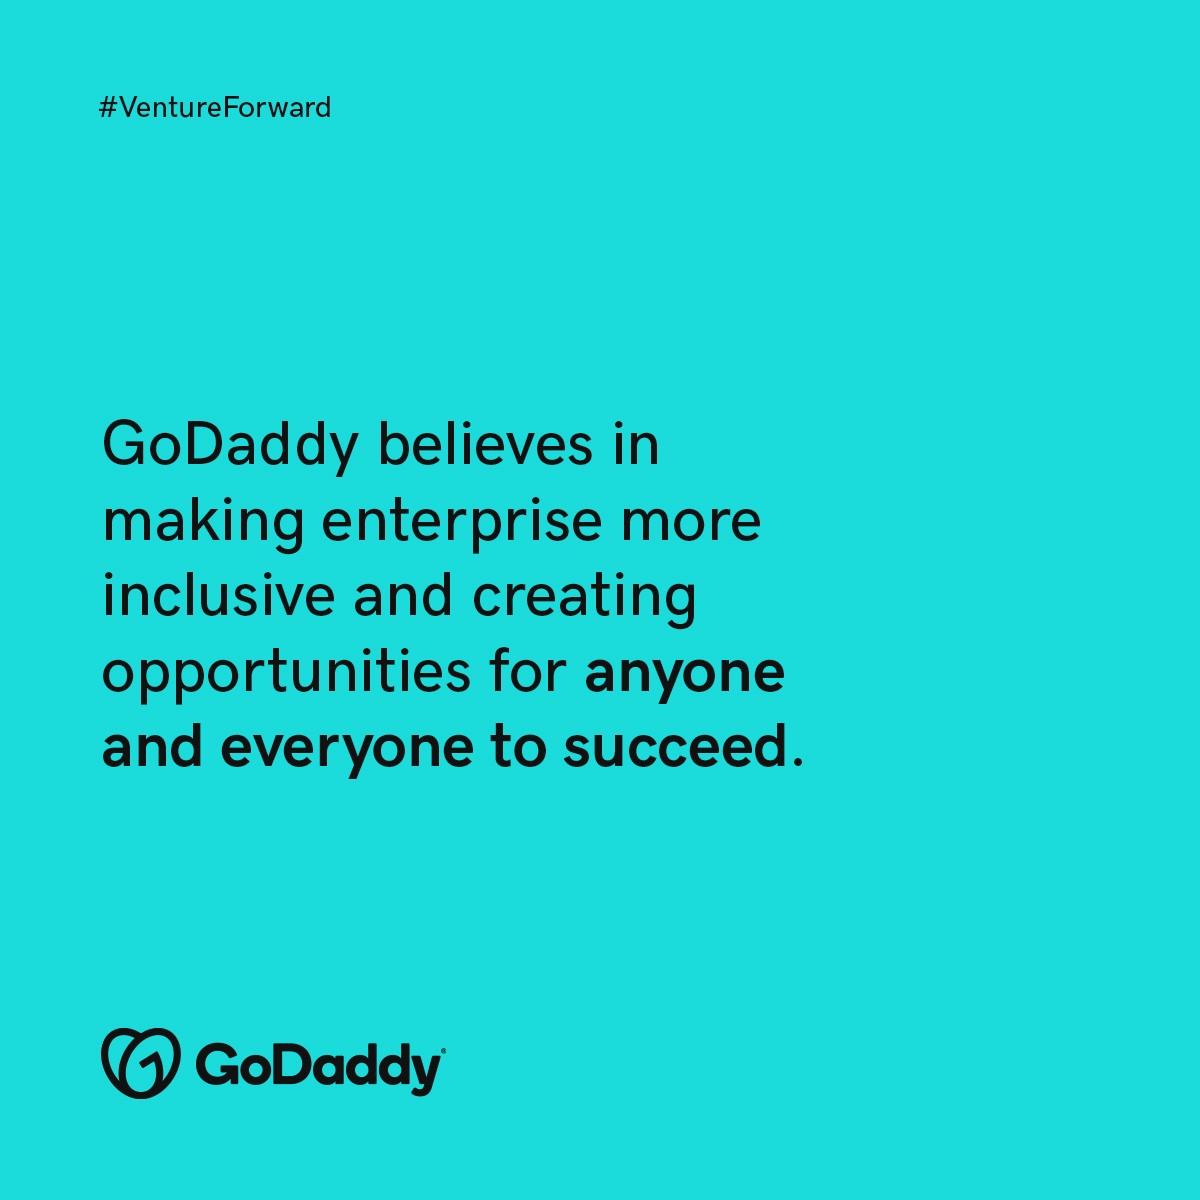 GoDaddy believes in making enterprise more inclusive and creating opportunities for anyone and everyone to succeed.